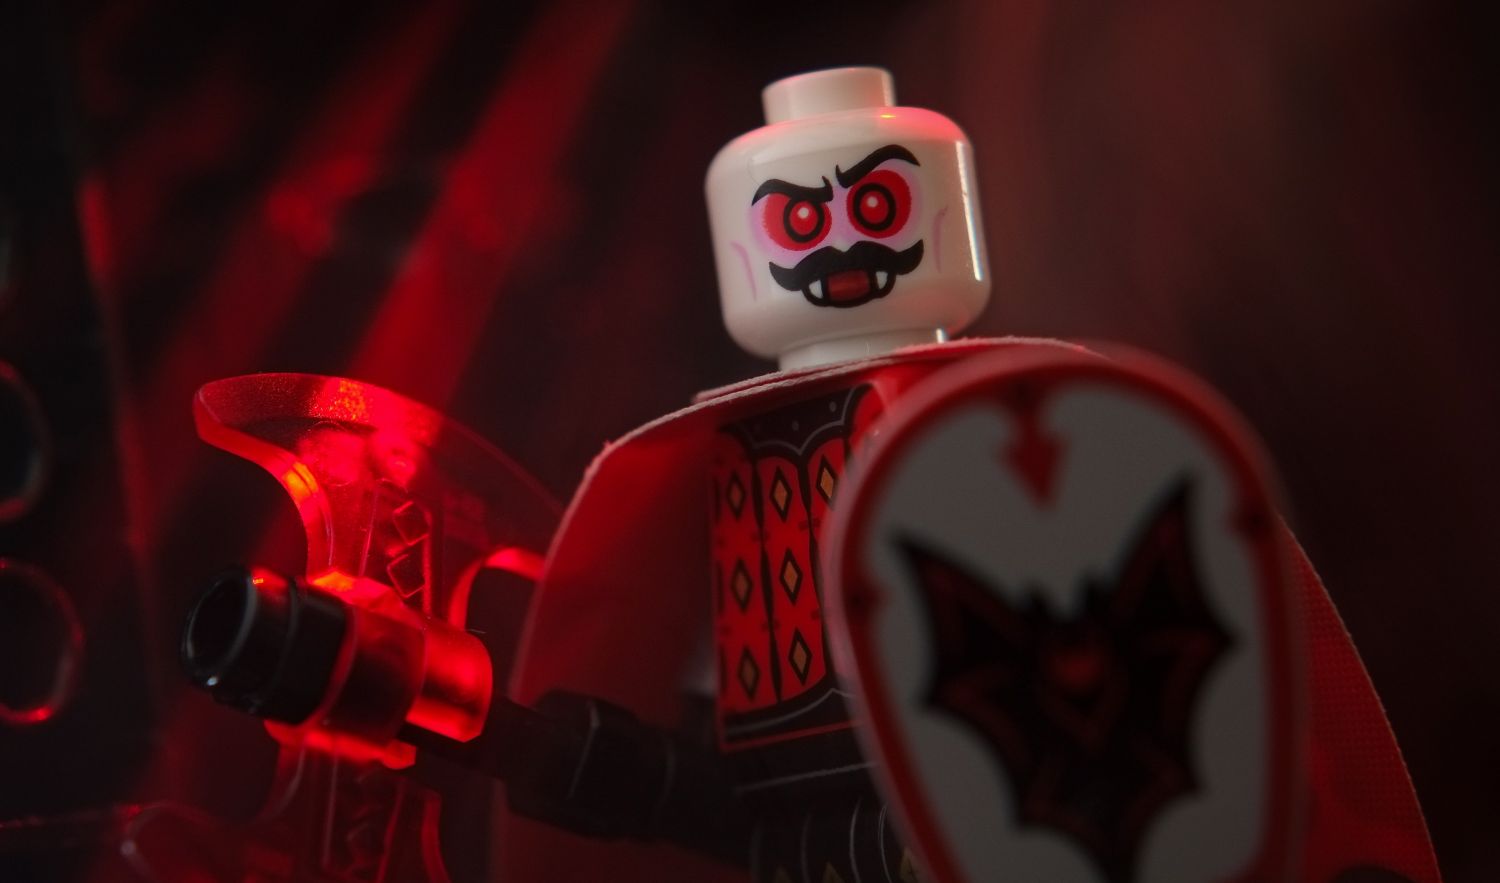 A LEGO Bat Lord minifigure holding a trans red axe.